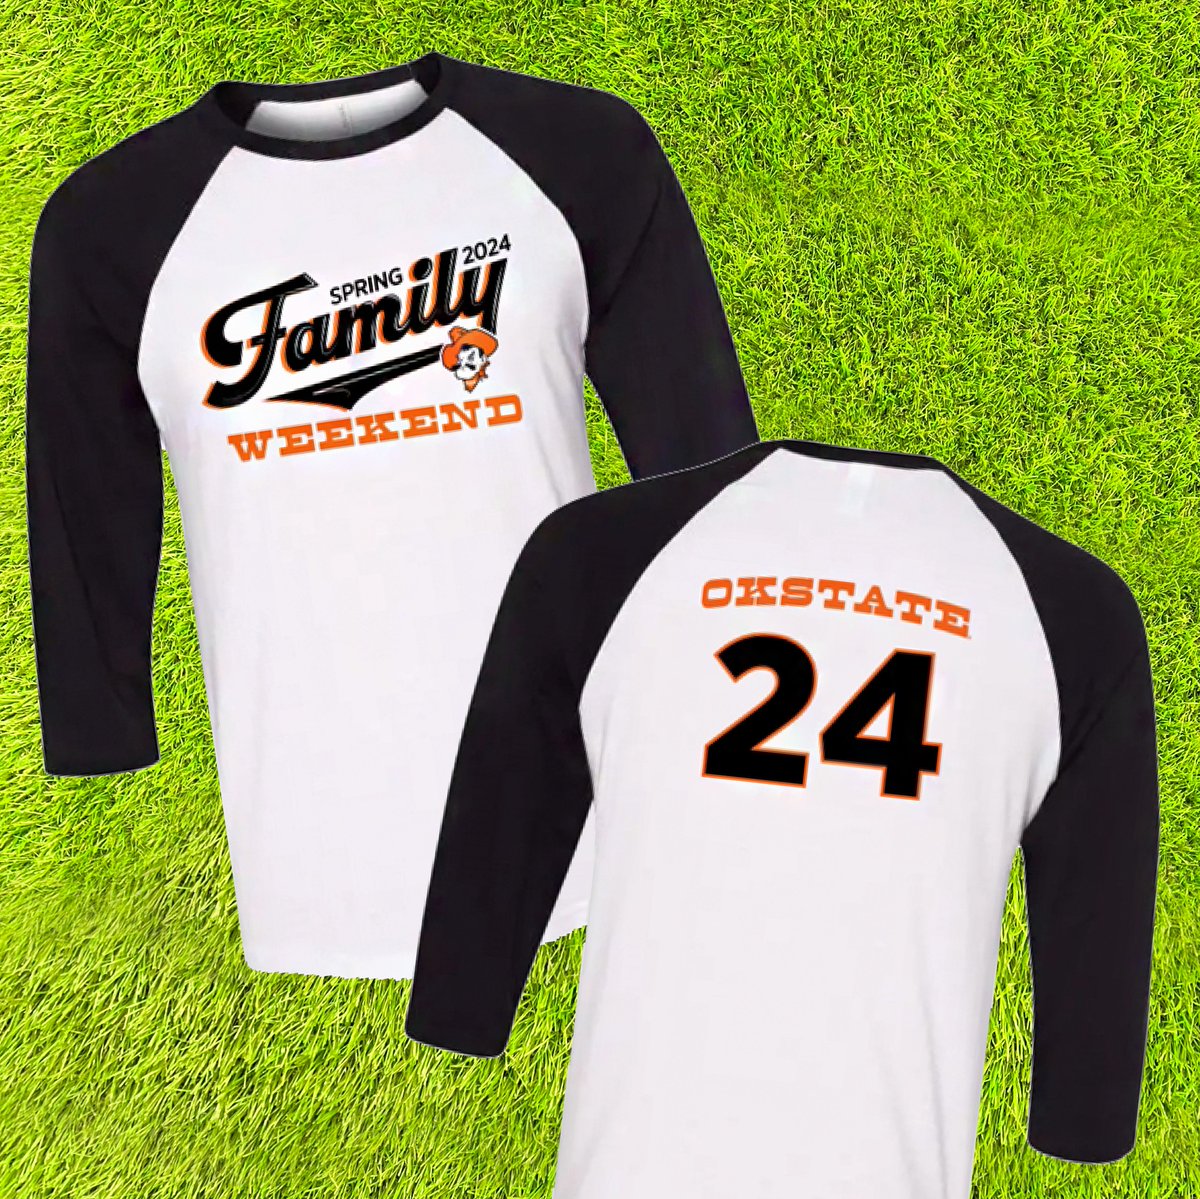 Gear up for Family Weekend with our limited edition shirts! Preorder online from March 25 to April 5 by 5:00 p.m. You can pick up your shirts at 030 Student Union on April 25 and April 26. 🟠 okla.st/3CJ1FCb #cowboyfamily #okstate